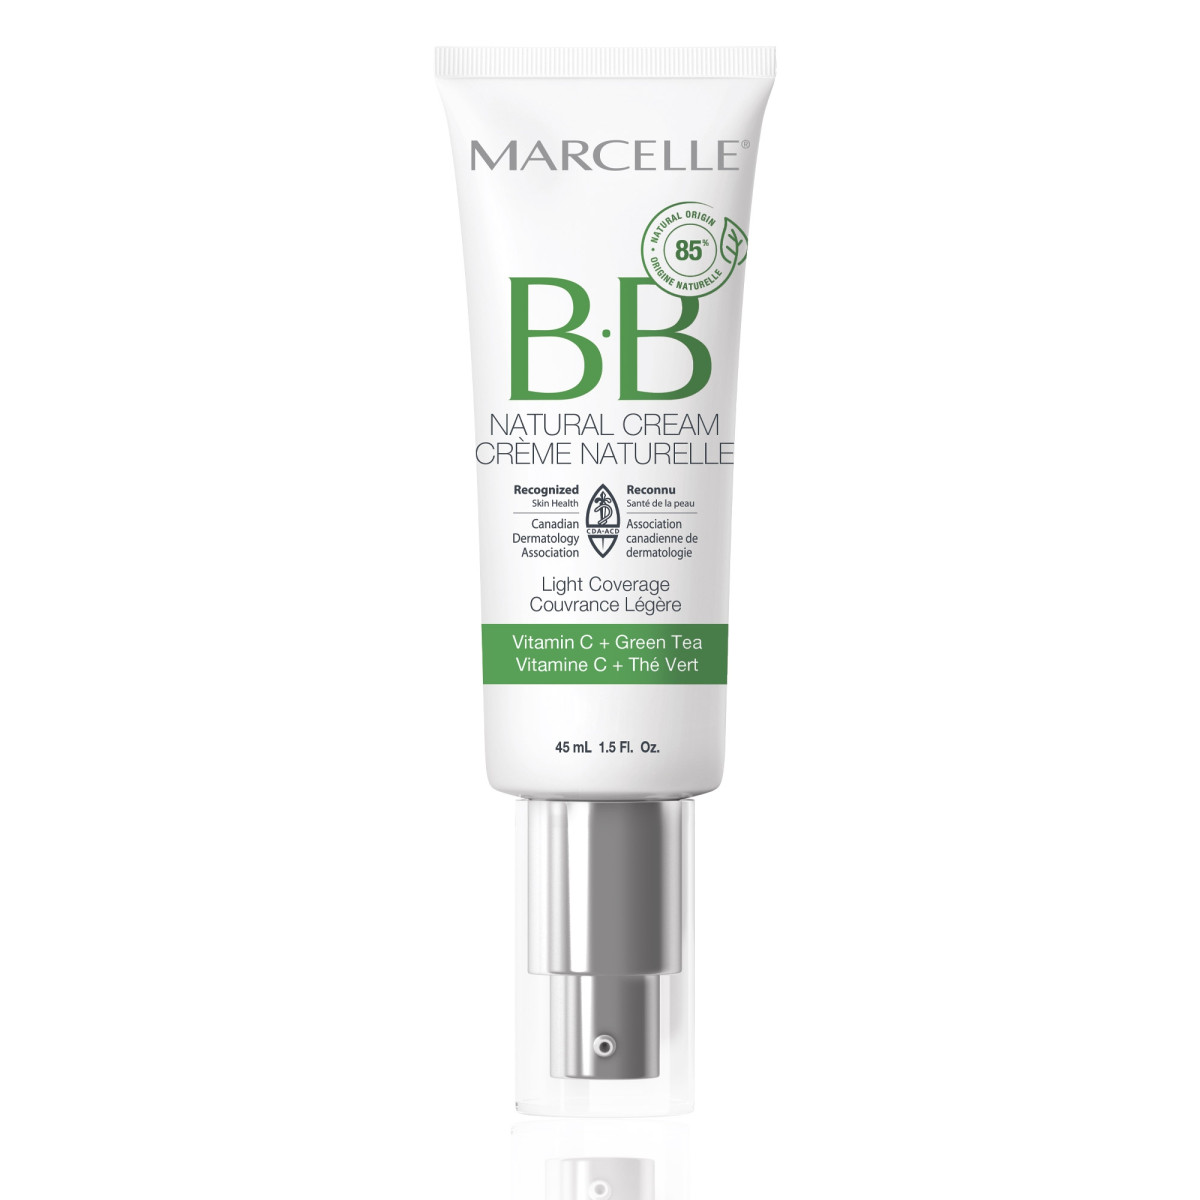 Marcelle BB Natural Cream